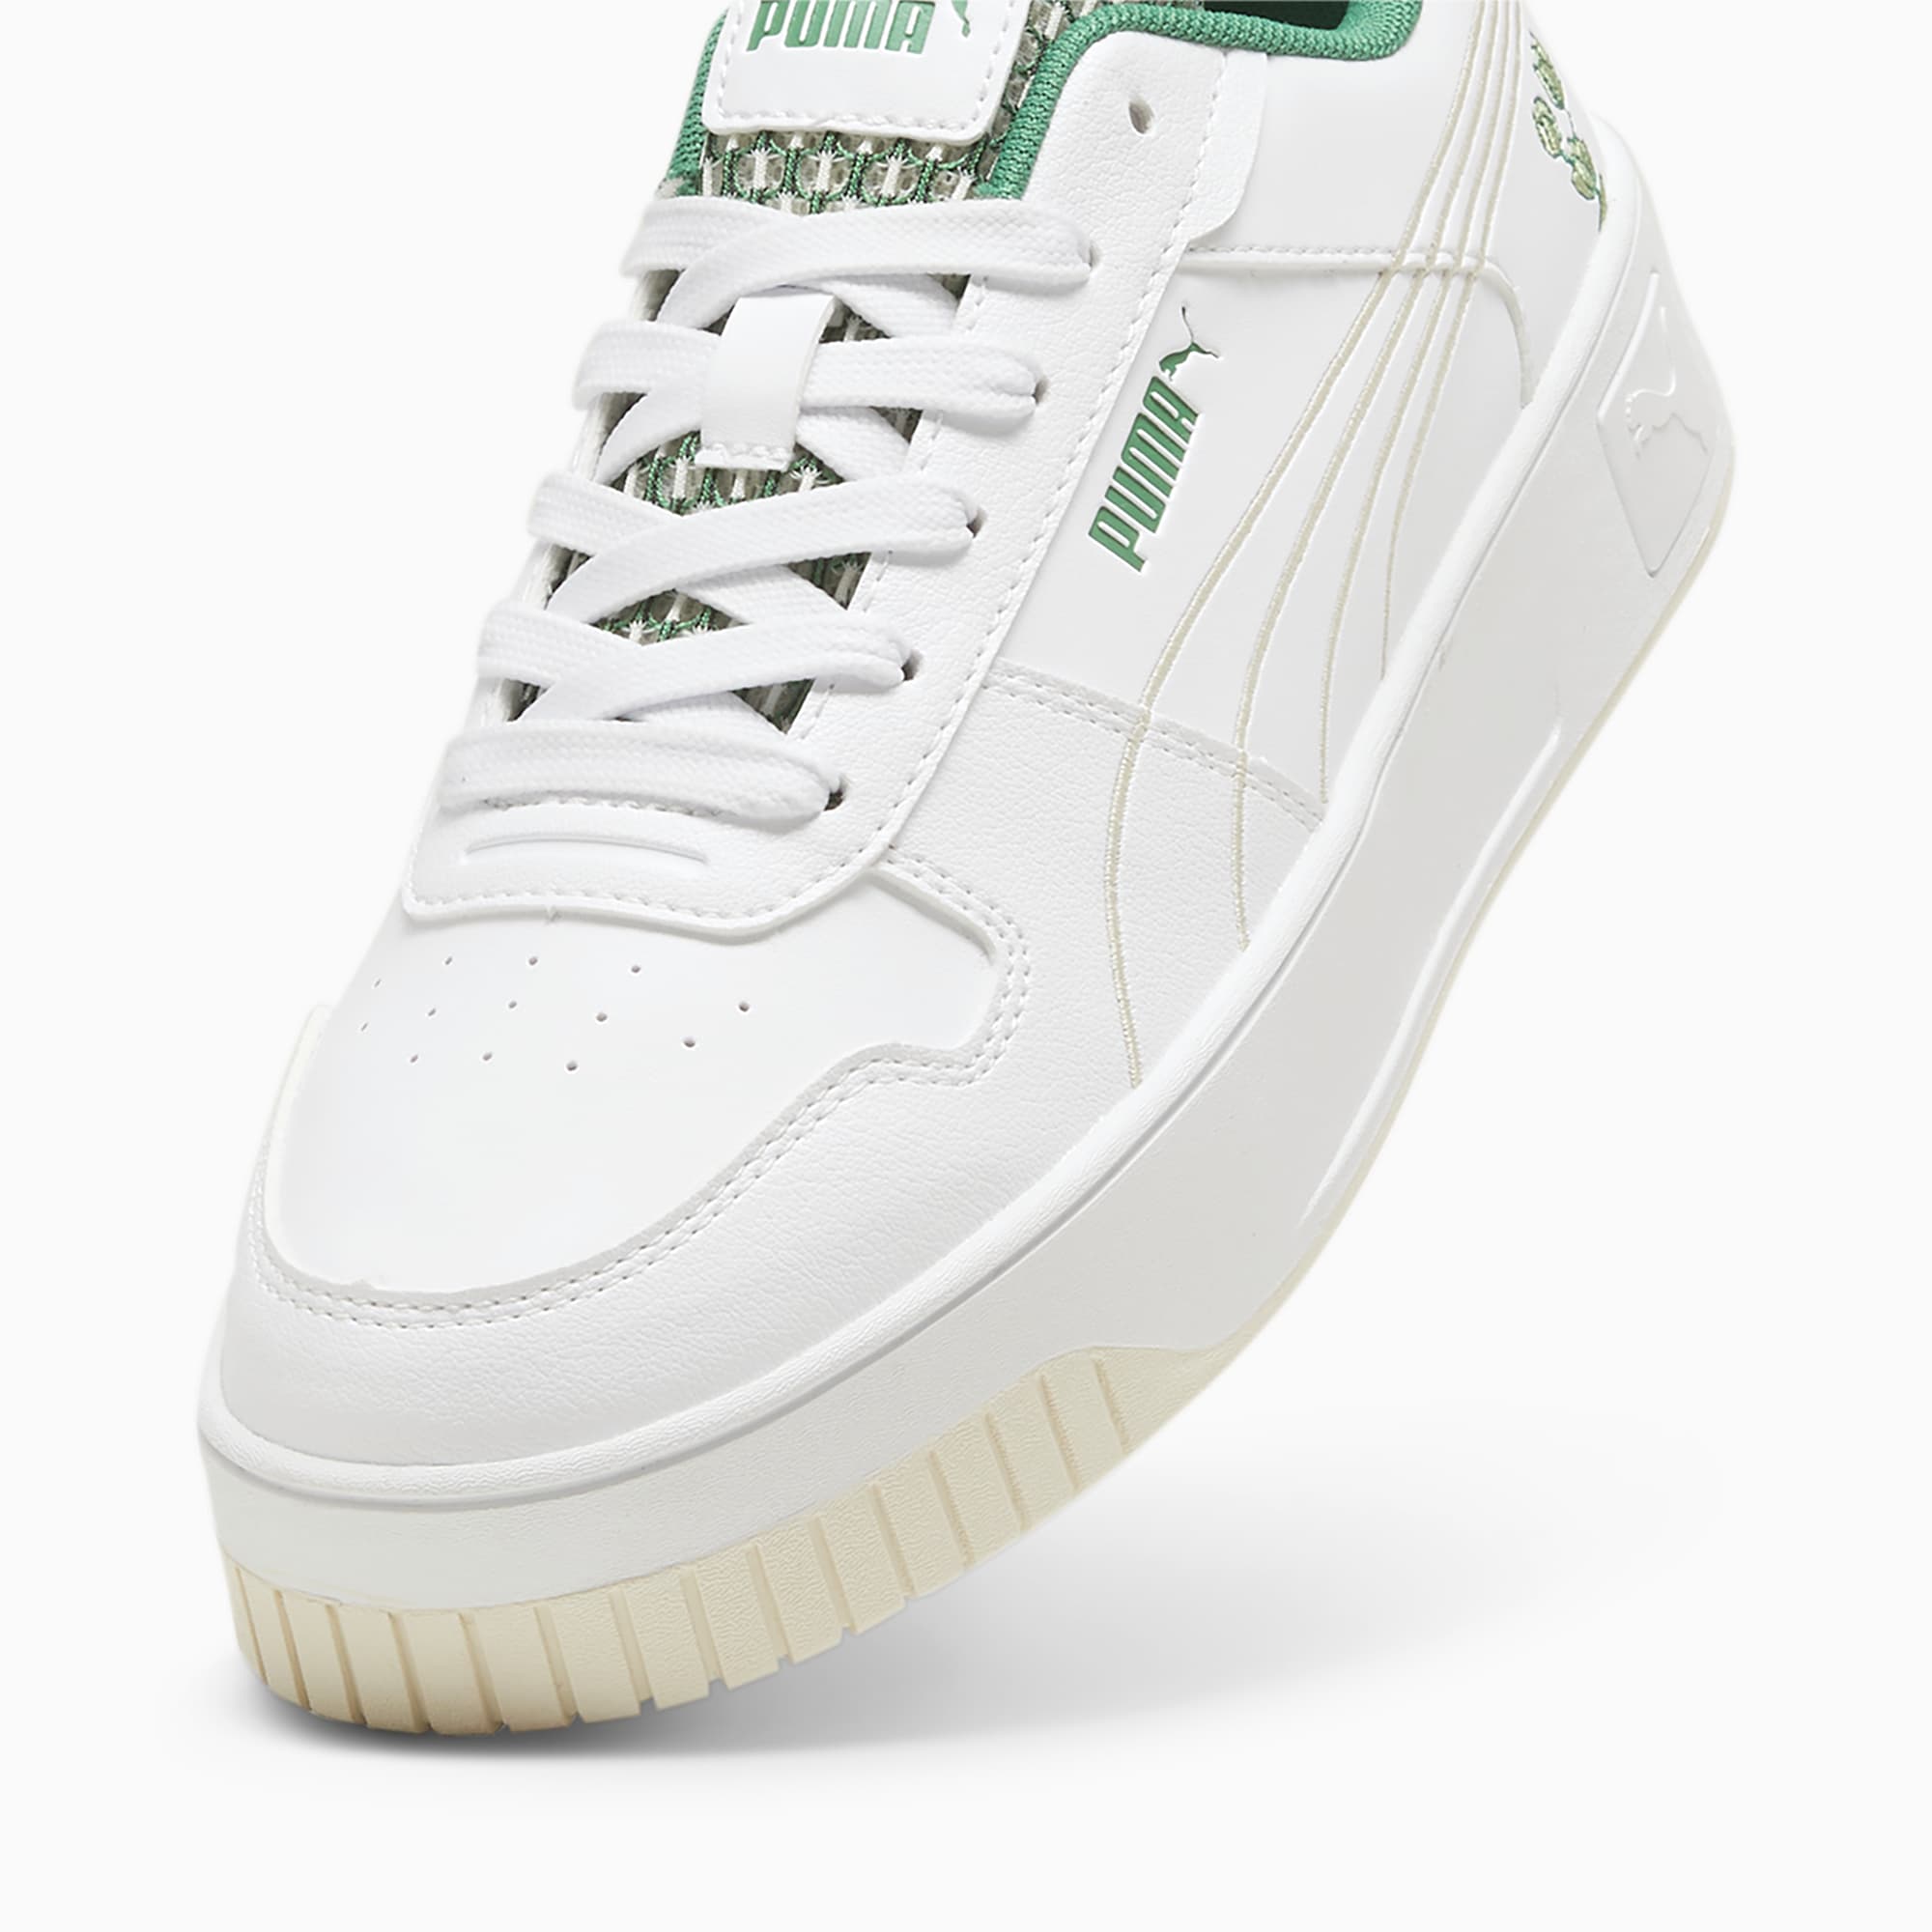 PUMA Carina Street Blossom Sneakers Voor Dames, Wit/Groen/Rood